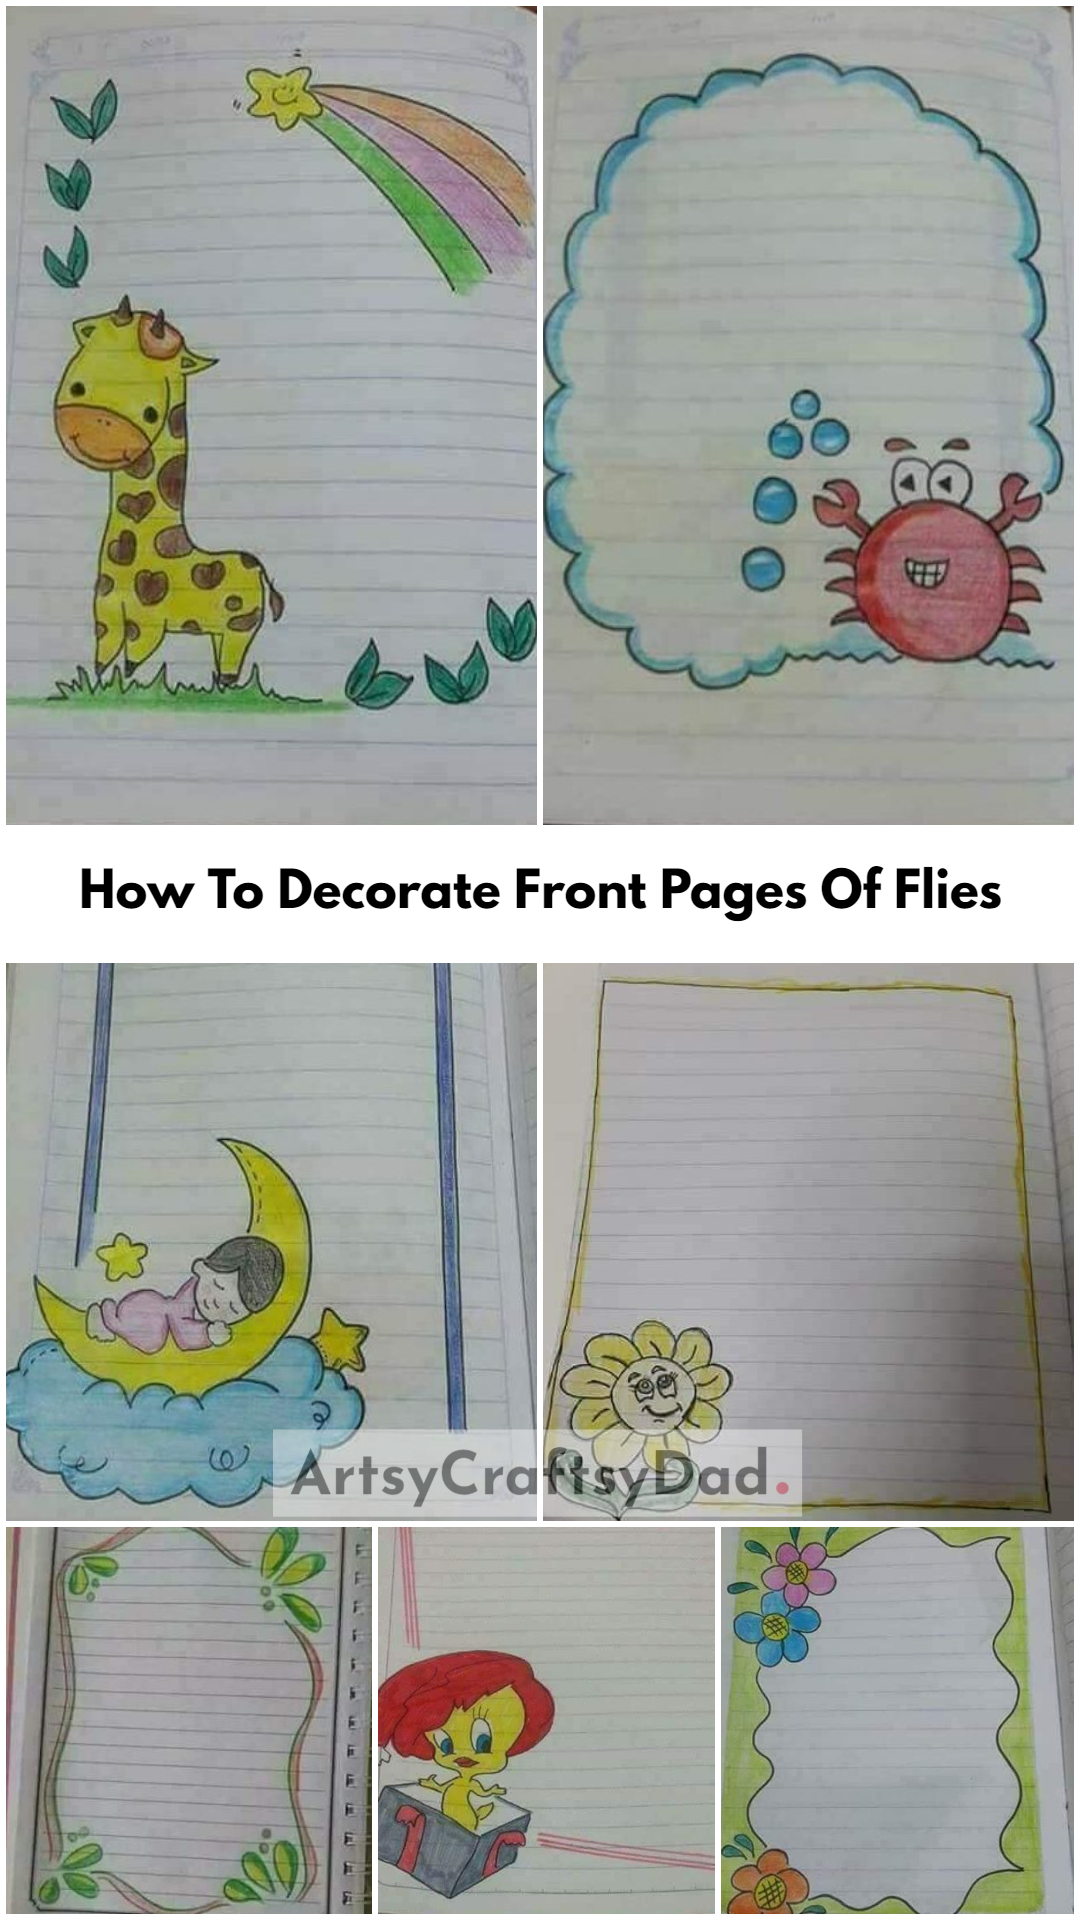 How To Decorate Front Pages Of Flies For School Projects